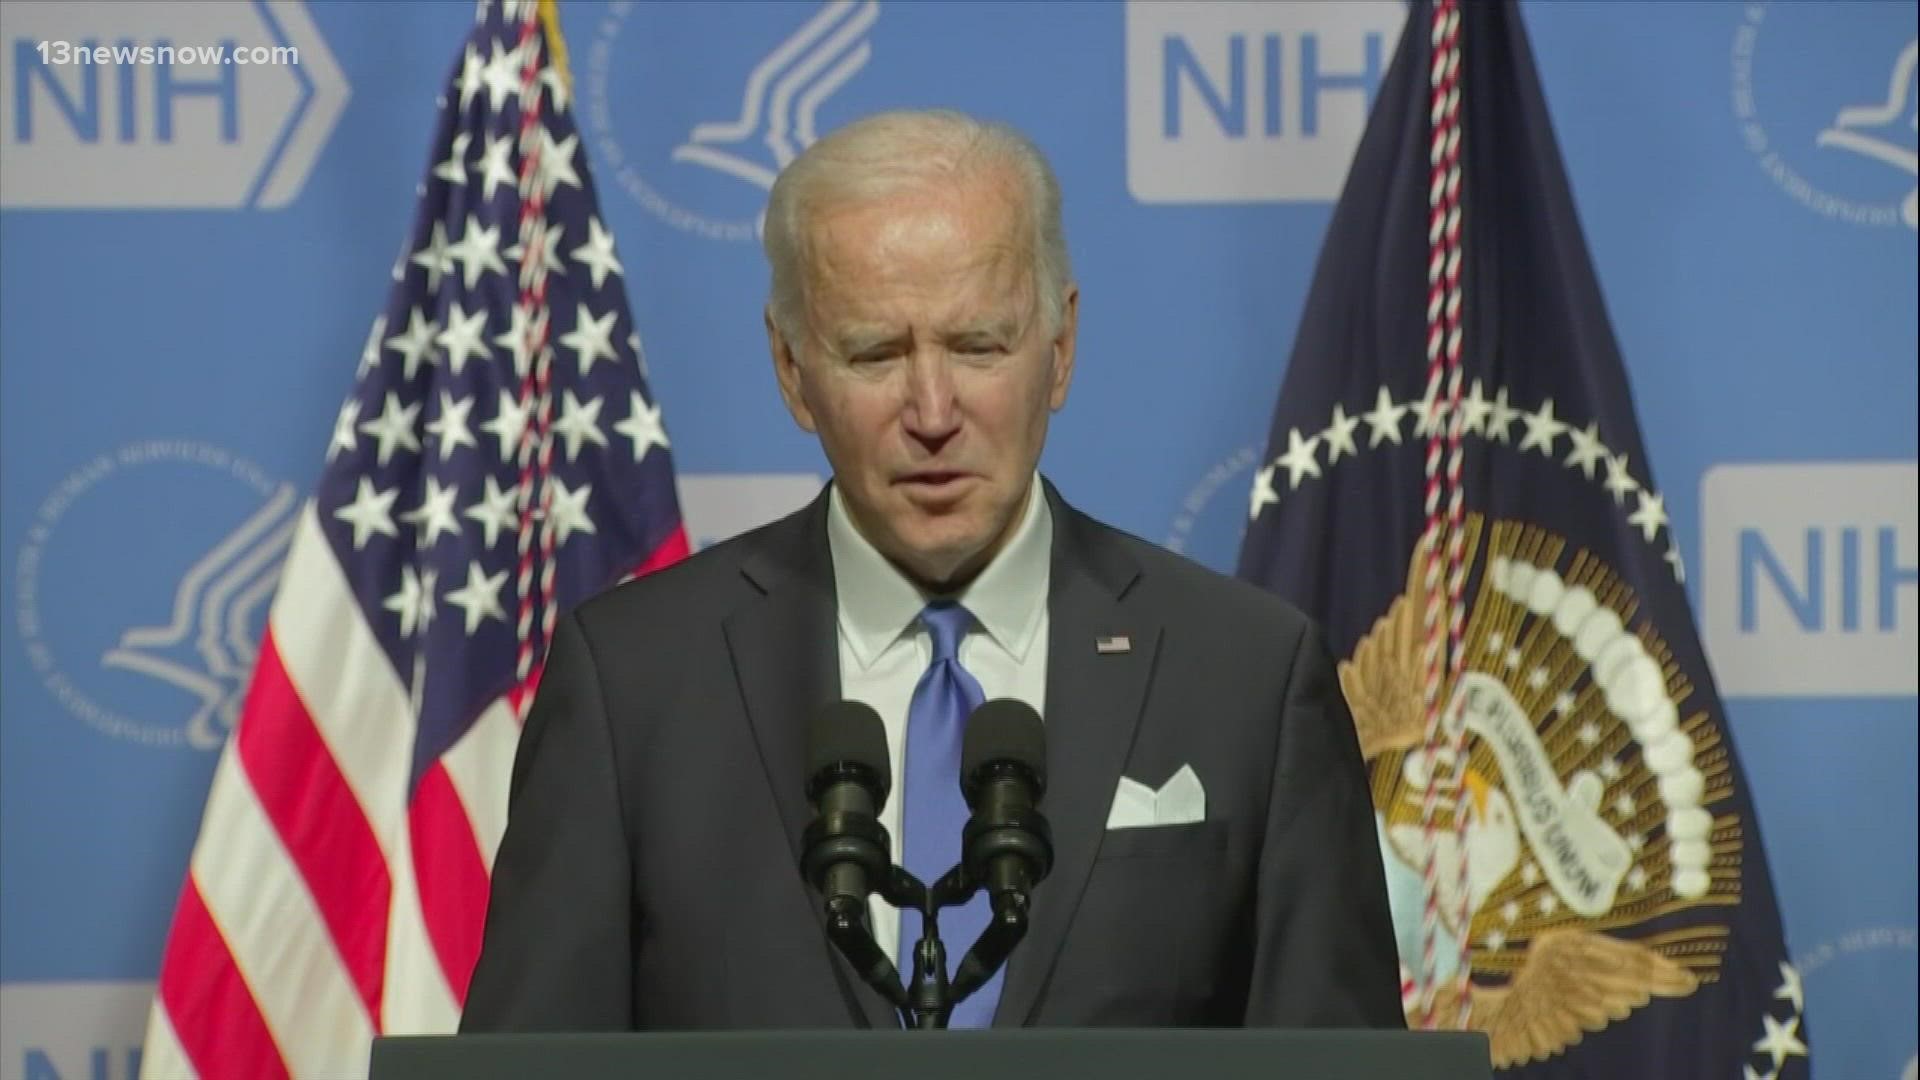 We are breaking down what President Biden's COVID-19 plan means for people in Hampton Roads.